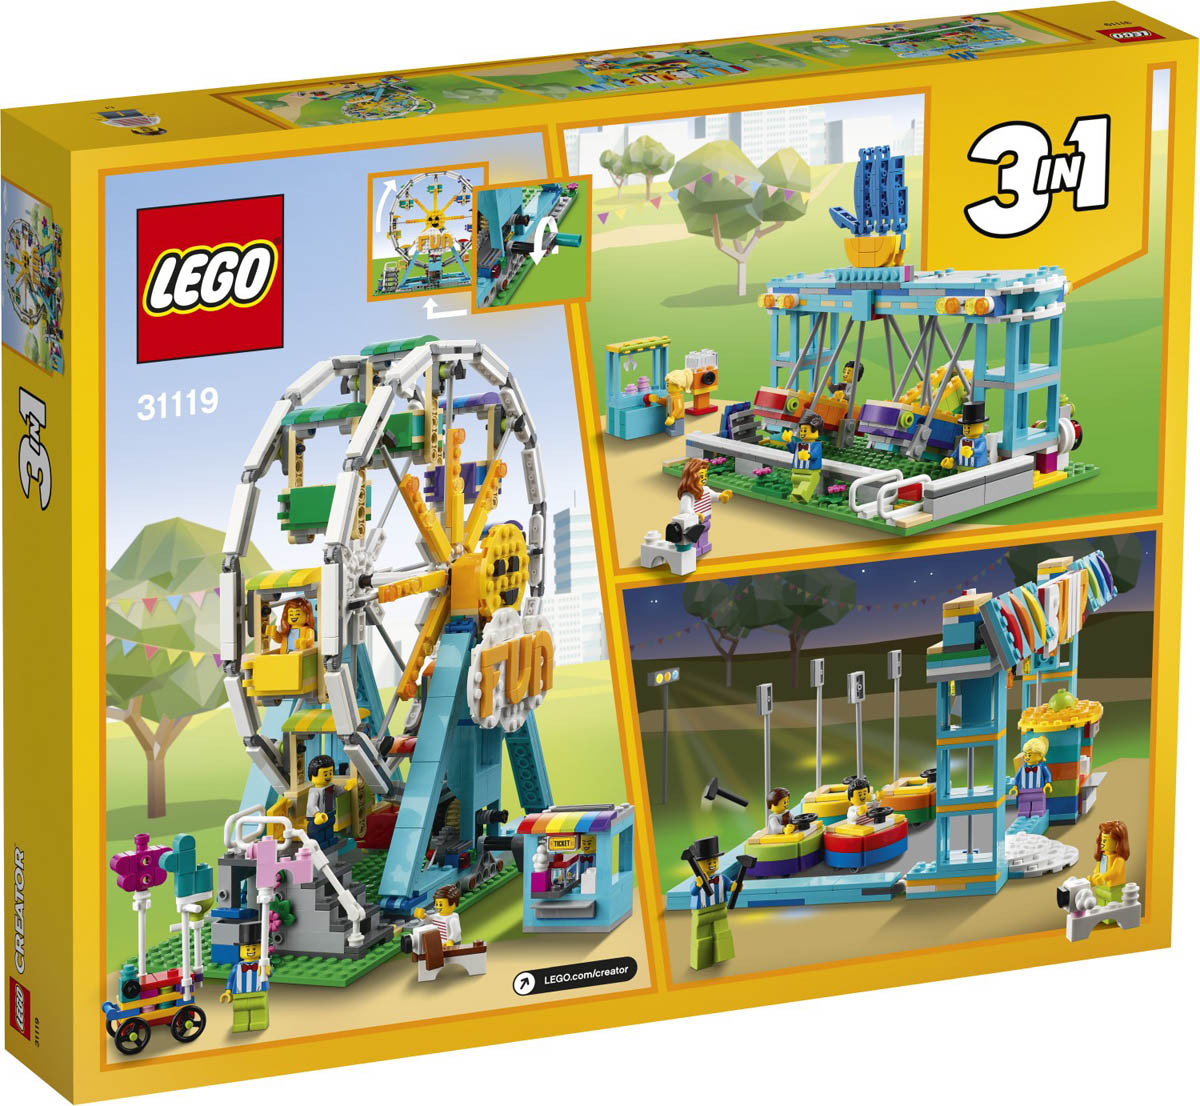 First look at new LEGO Creator 3-in-1 Space Shuttle & Ferris Wheel sets -  Jay's Brick Blog